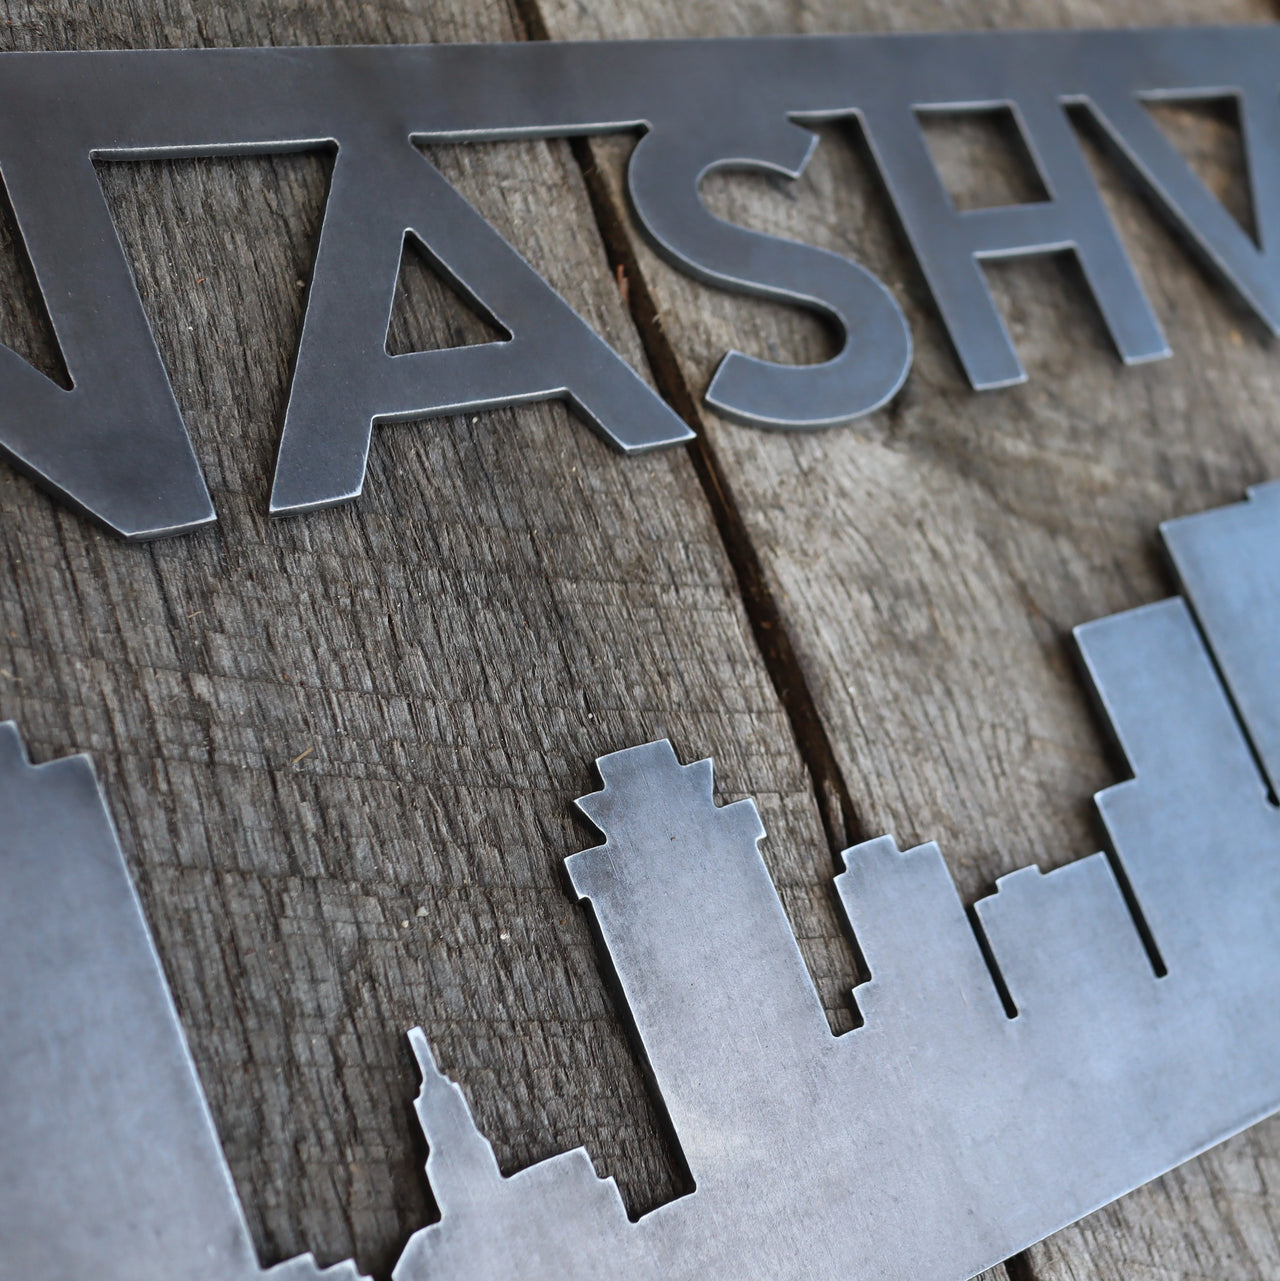 Personalized Metal Nashville Skyline Sign - Nashville, Tennessee Wall Art - Music City Skyline Personalized Home Decor